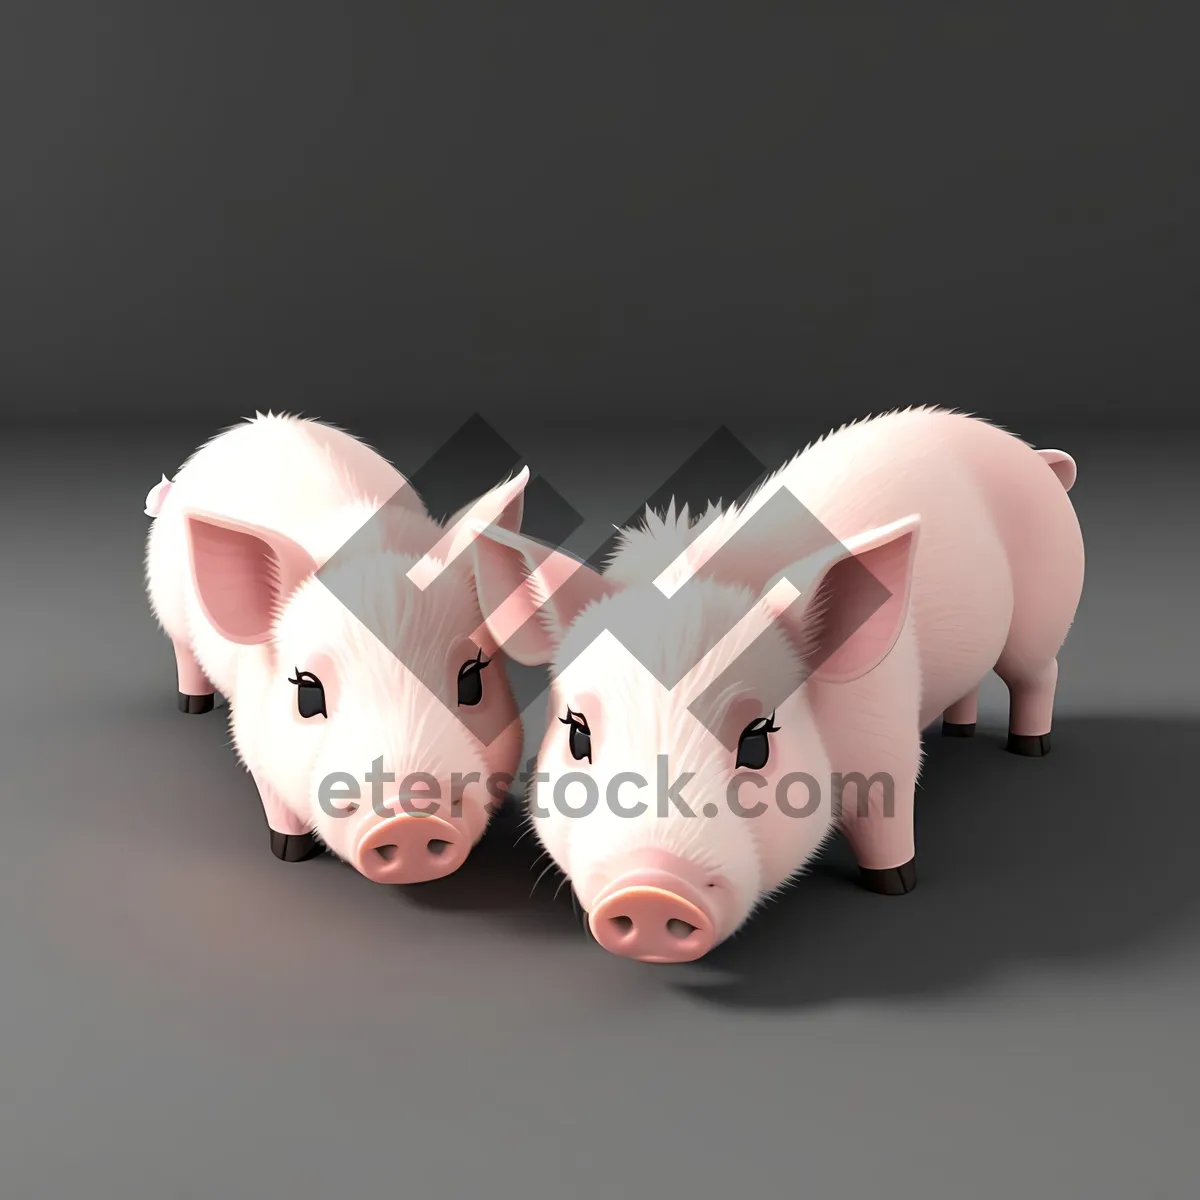 Picture of Piggy Bank Savings: A Wealthy Investment Container